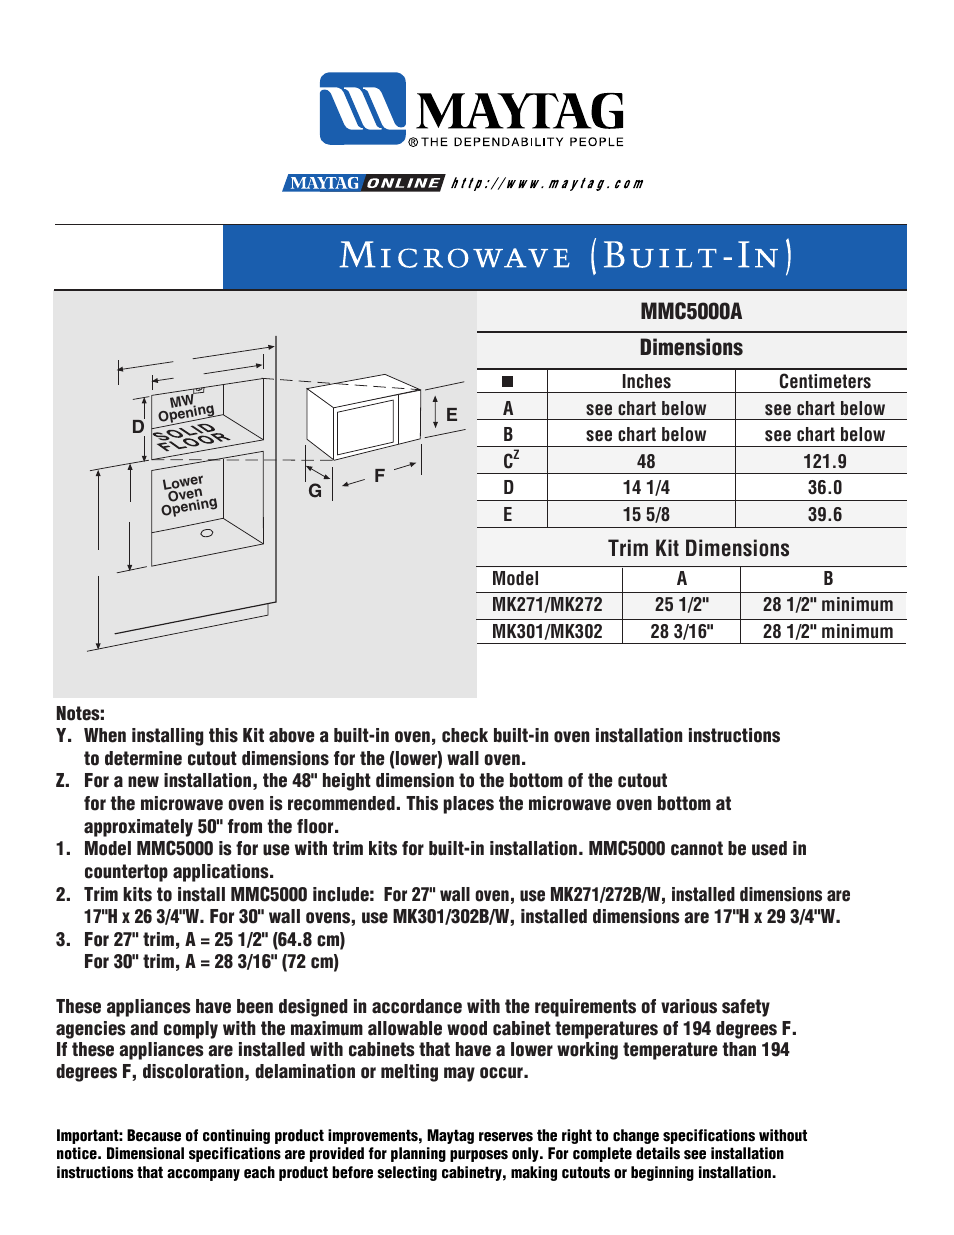 Microwave Dimensions Chart